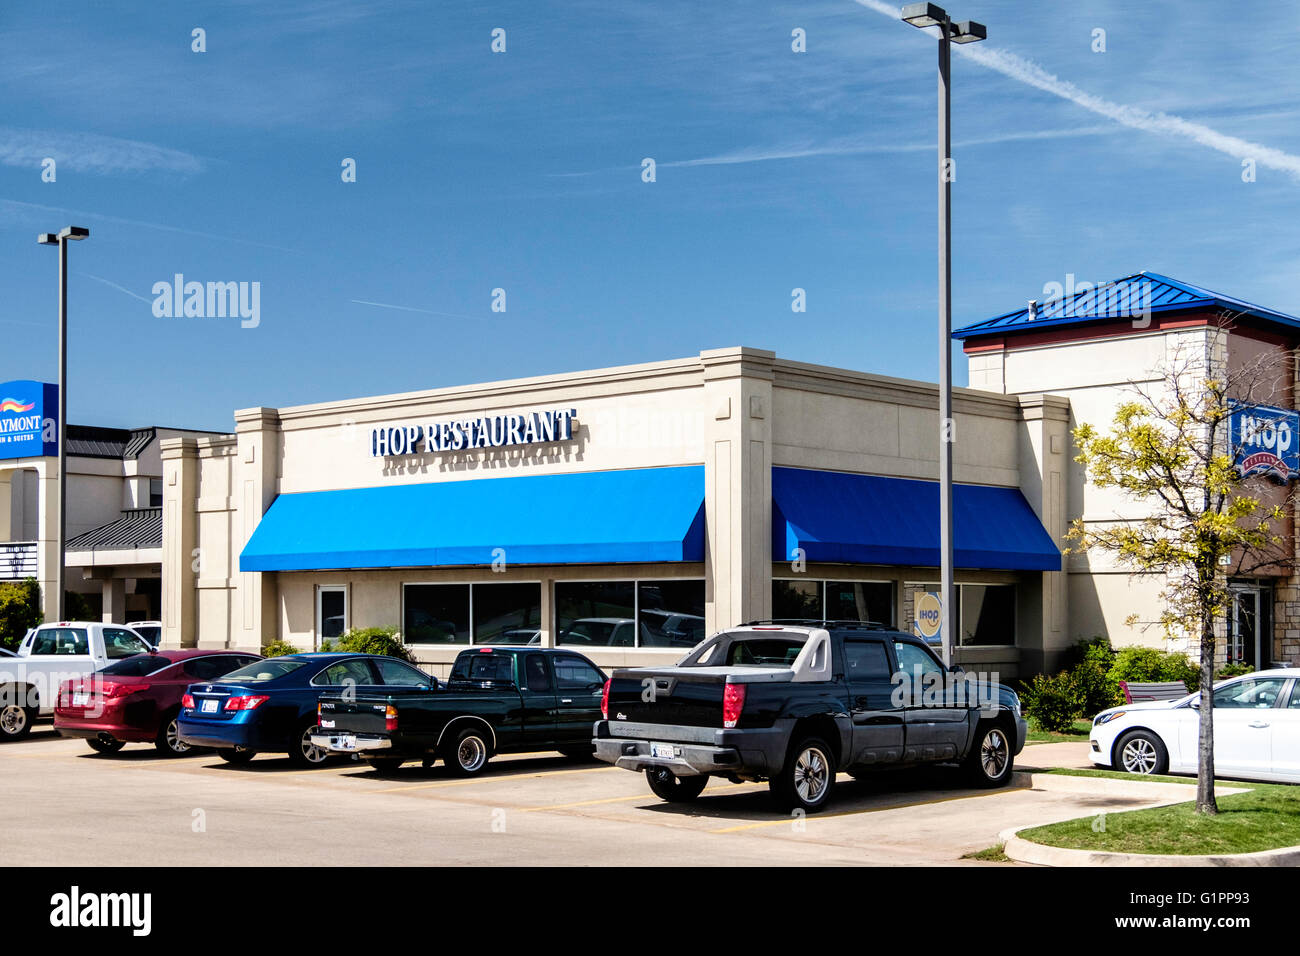 Ihop exterior hi-res stock photography and images - Alamy